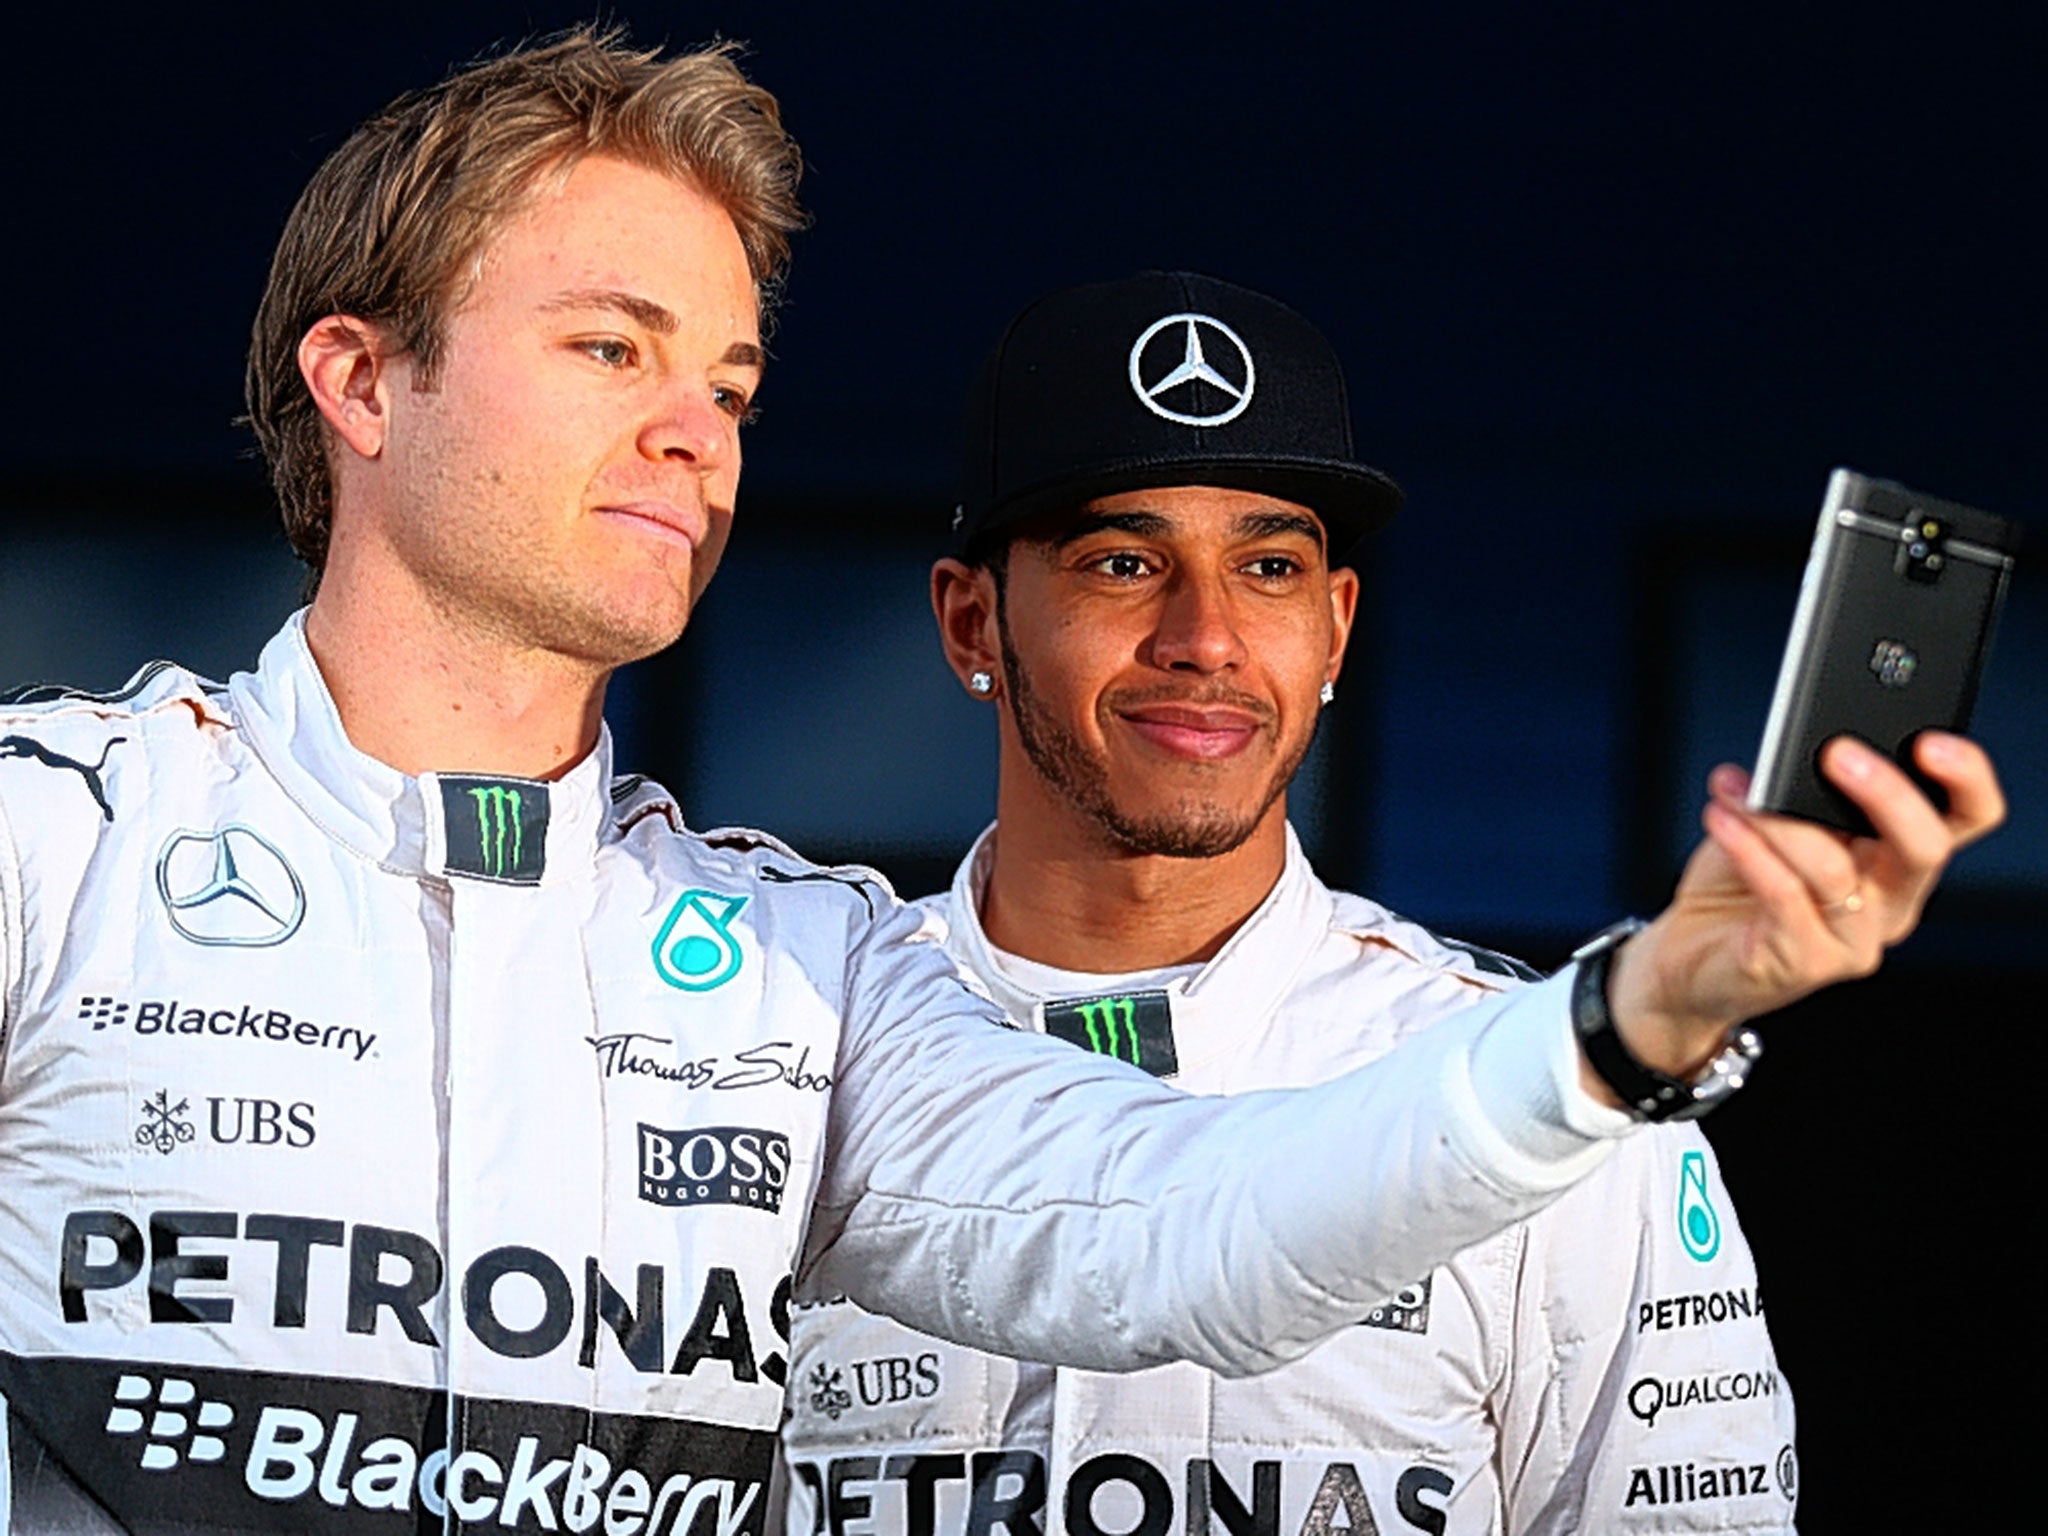 Team-mates and rivals, Nico Rosberg and Lewis Hamilton will be the story again this year